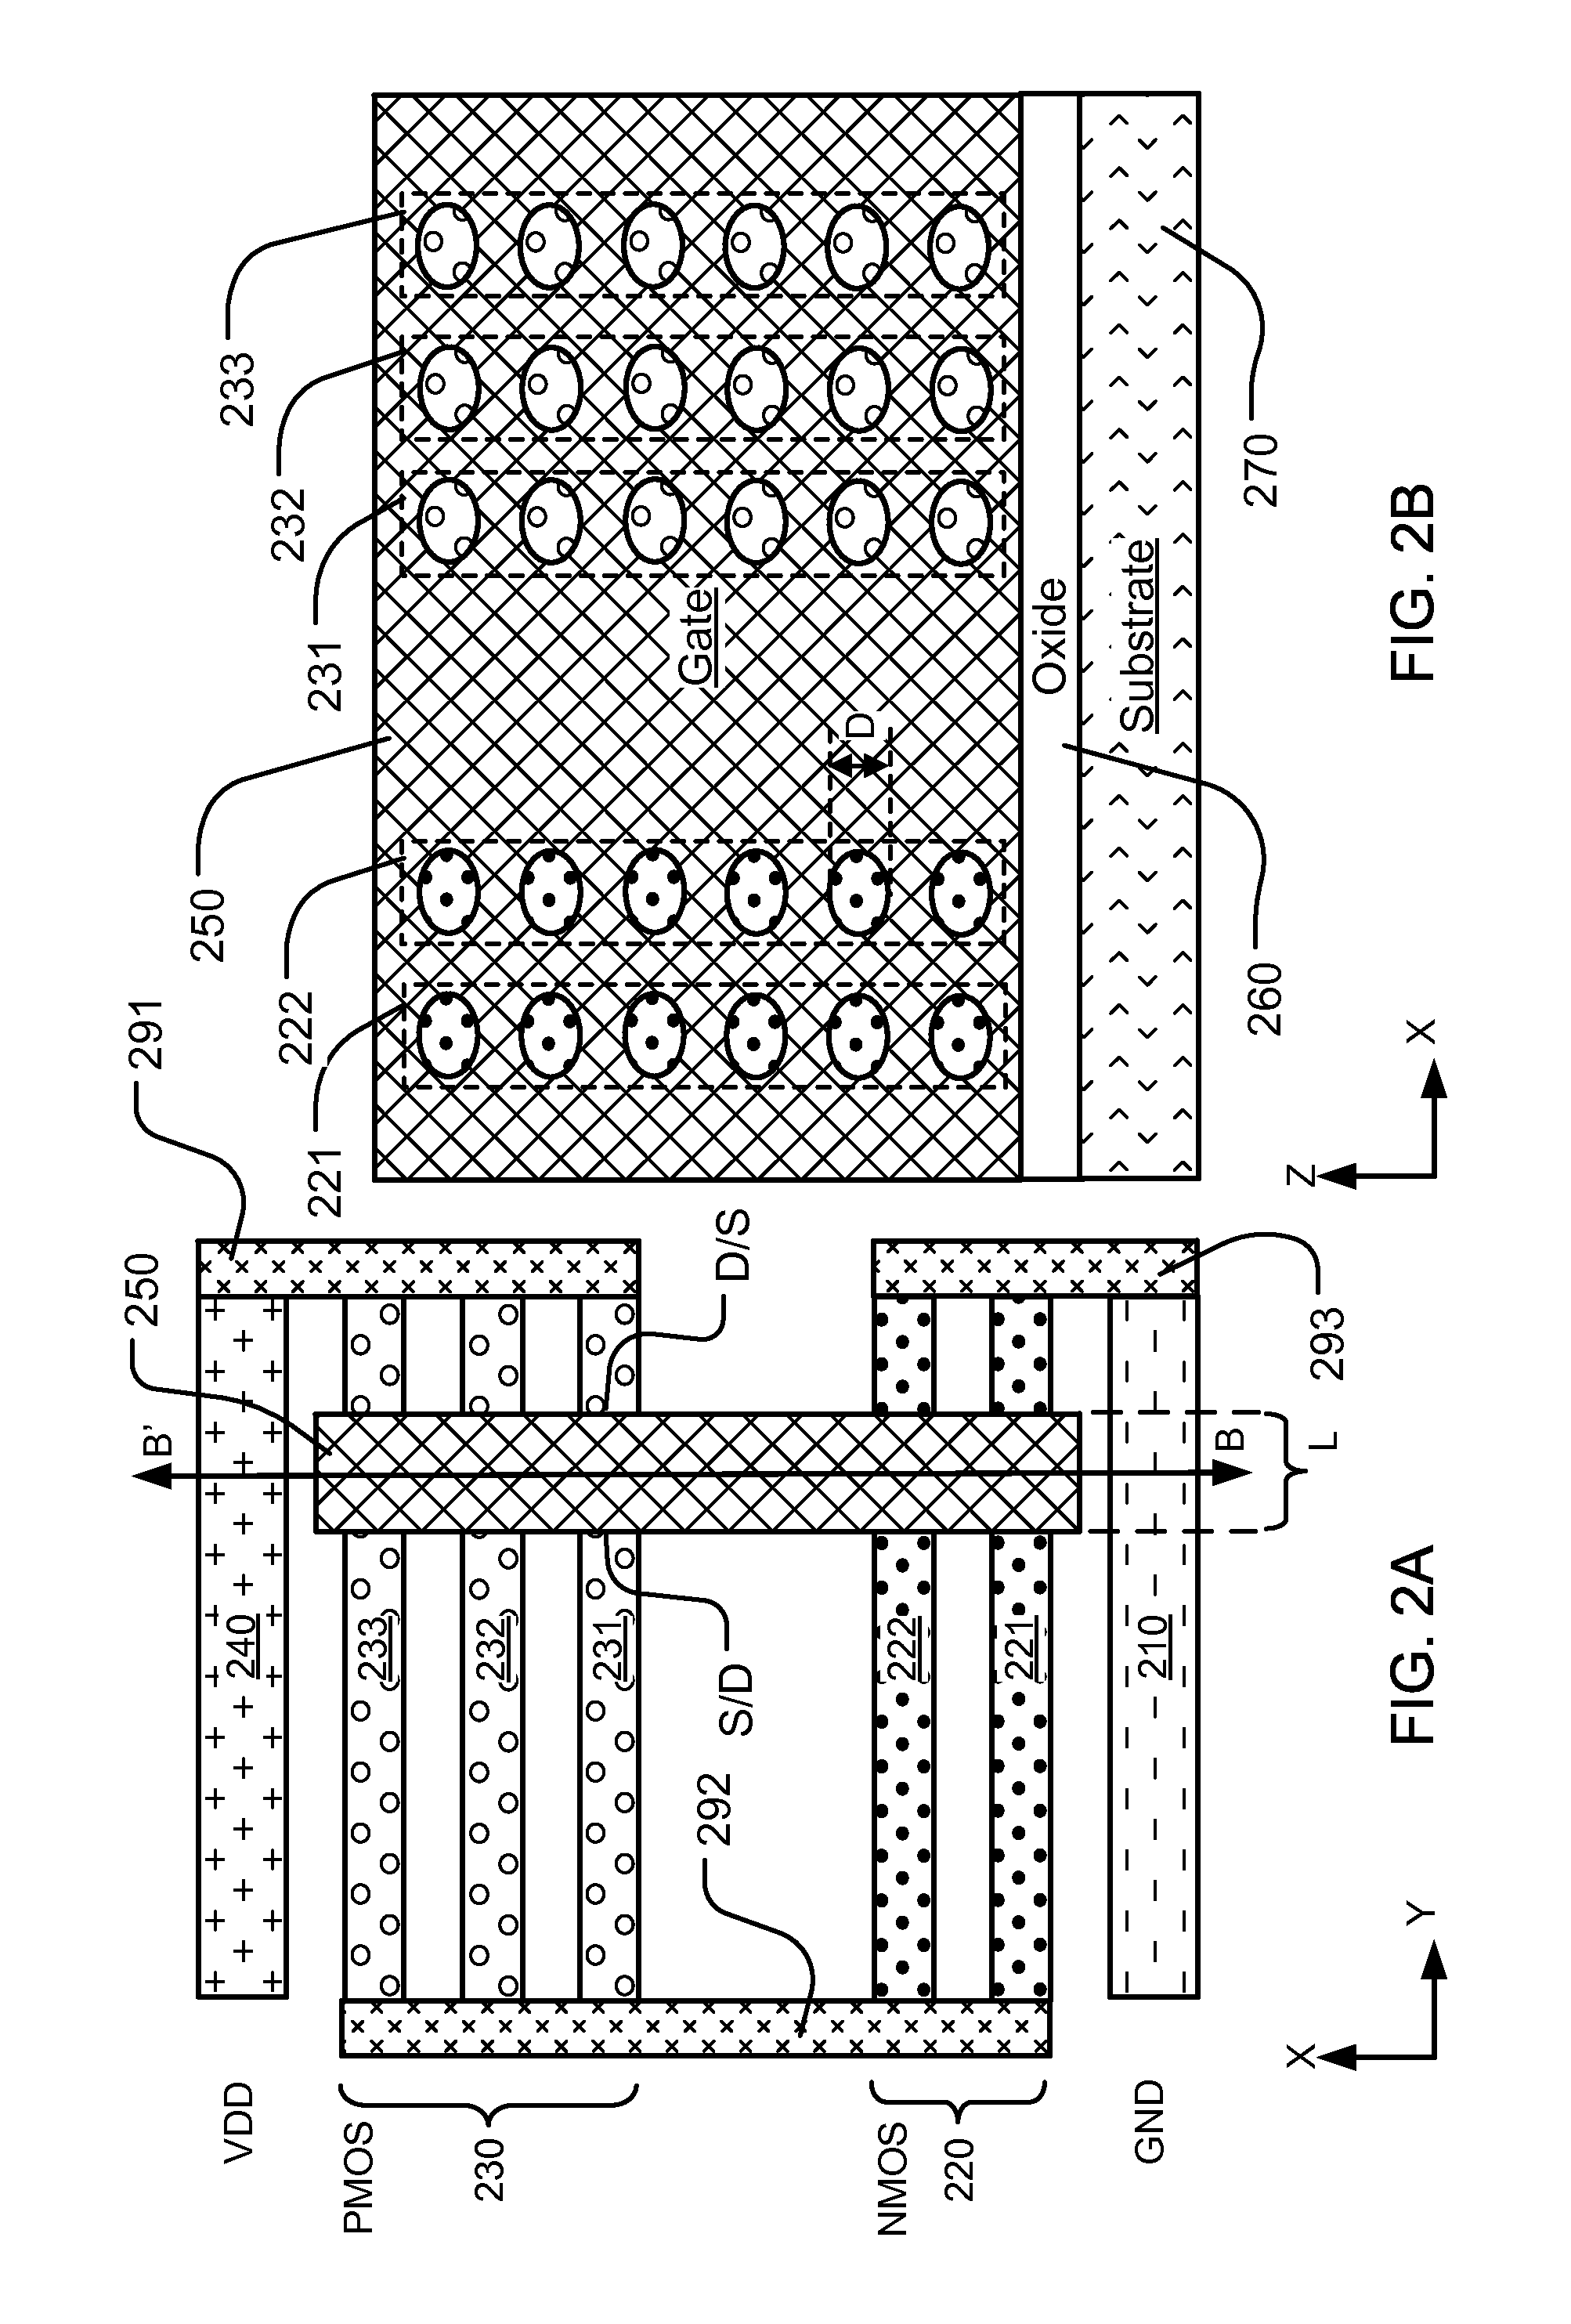 Memory cells having transistors with different numbers of nanowires or 2d material strips